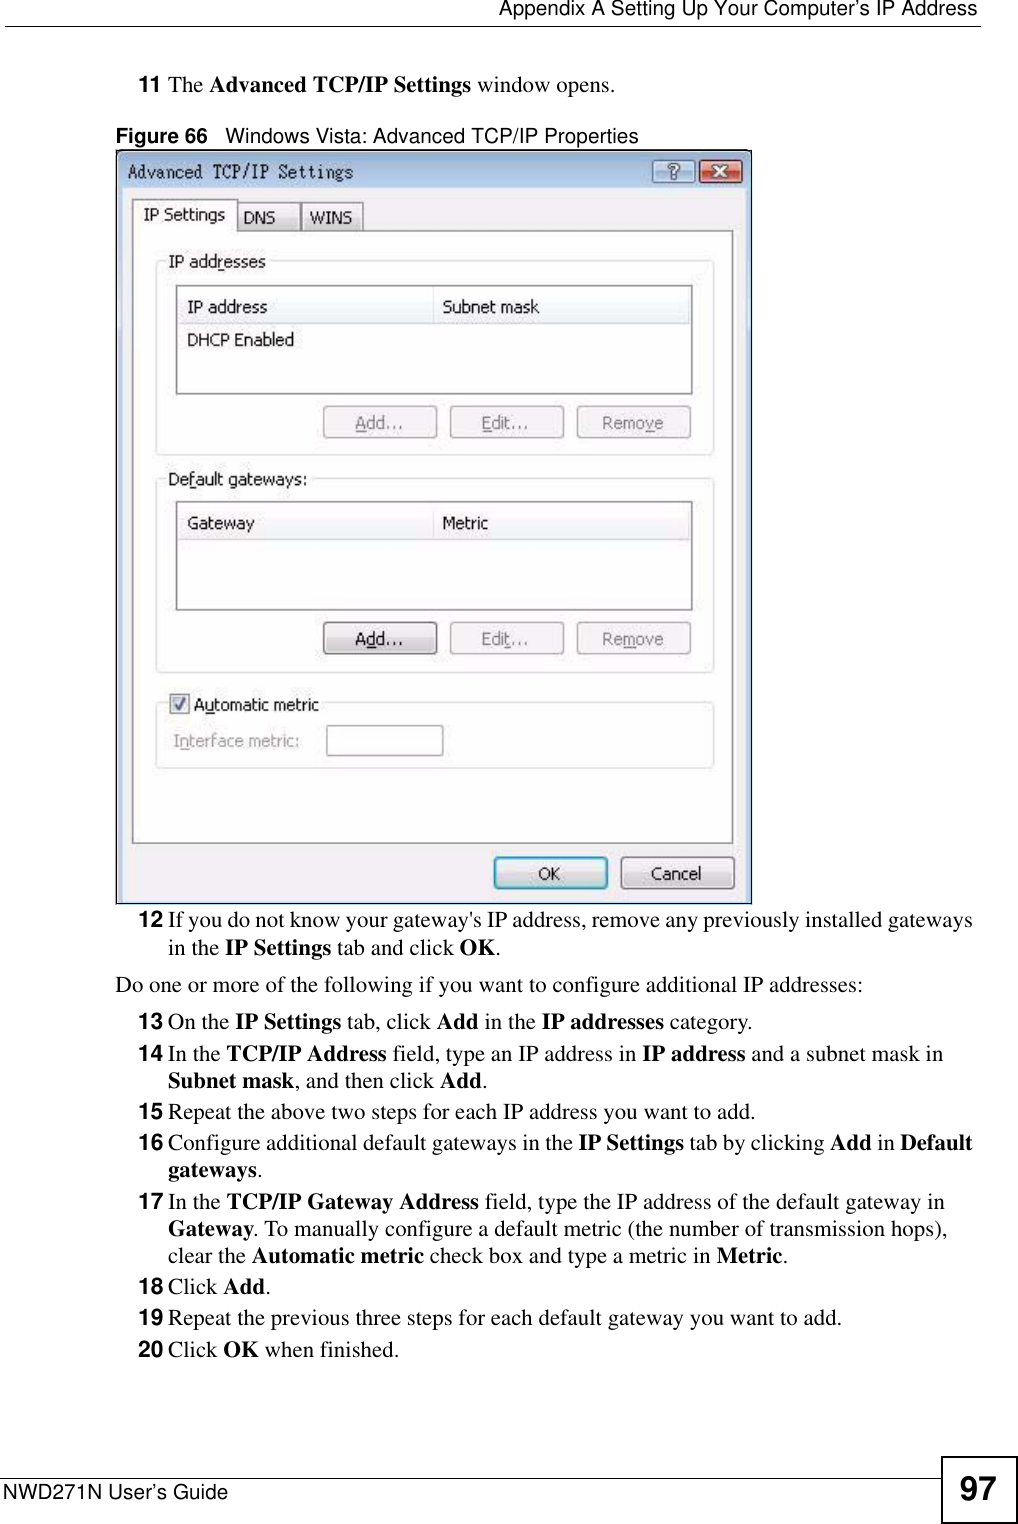  Appendix A Setting Up Your Computer’s IP AddressNWD271N User’s Guide 9711 The Advanced TCP/IP Settings window opens.Figure 66   Windows Vista: Advanced TCP/IP Properties12 If you do not know your gateway&apos;s IP address, remove any previously installed gateways in the IP Settings tab and click OK.Do one or more of the following if you want to configure additional IP addresses:13 On the IP Settings tab, click Add in the IP addresses category.14 In the TCP/IP Address field, type an IP address in IP address and a subnet mask in Subnet mask, and then click Add.15 Repeat the above two steps for each IP address you want to add.16 Configure additional default gateways in the IP Settings tab by clicking Add in Default gateways.17 In the TCP/IP Gateway Address field, type the IP address of the default gateway in Gateway. To manually configure a default metric (the number of transmission hops), clear the Automatic metric check box and type a metric in Metric.18 Click Add. 19 Repeat the previous three steps for each default gateway you want to add.20 Click OK when finished.